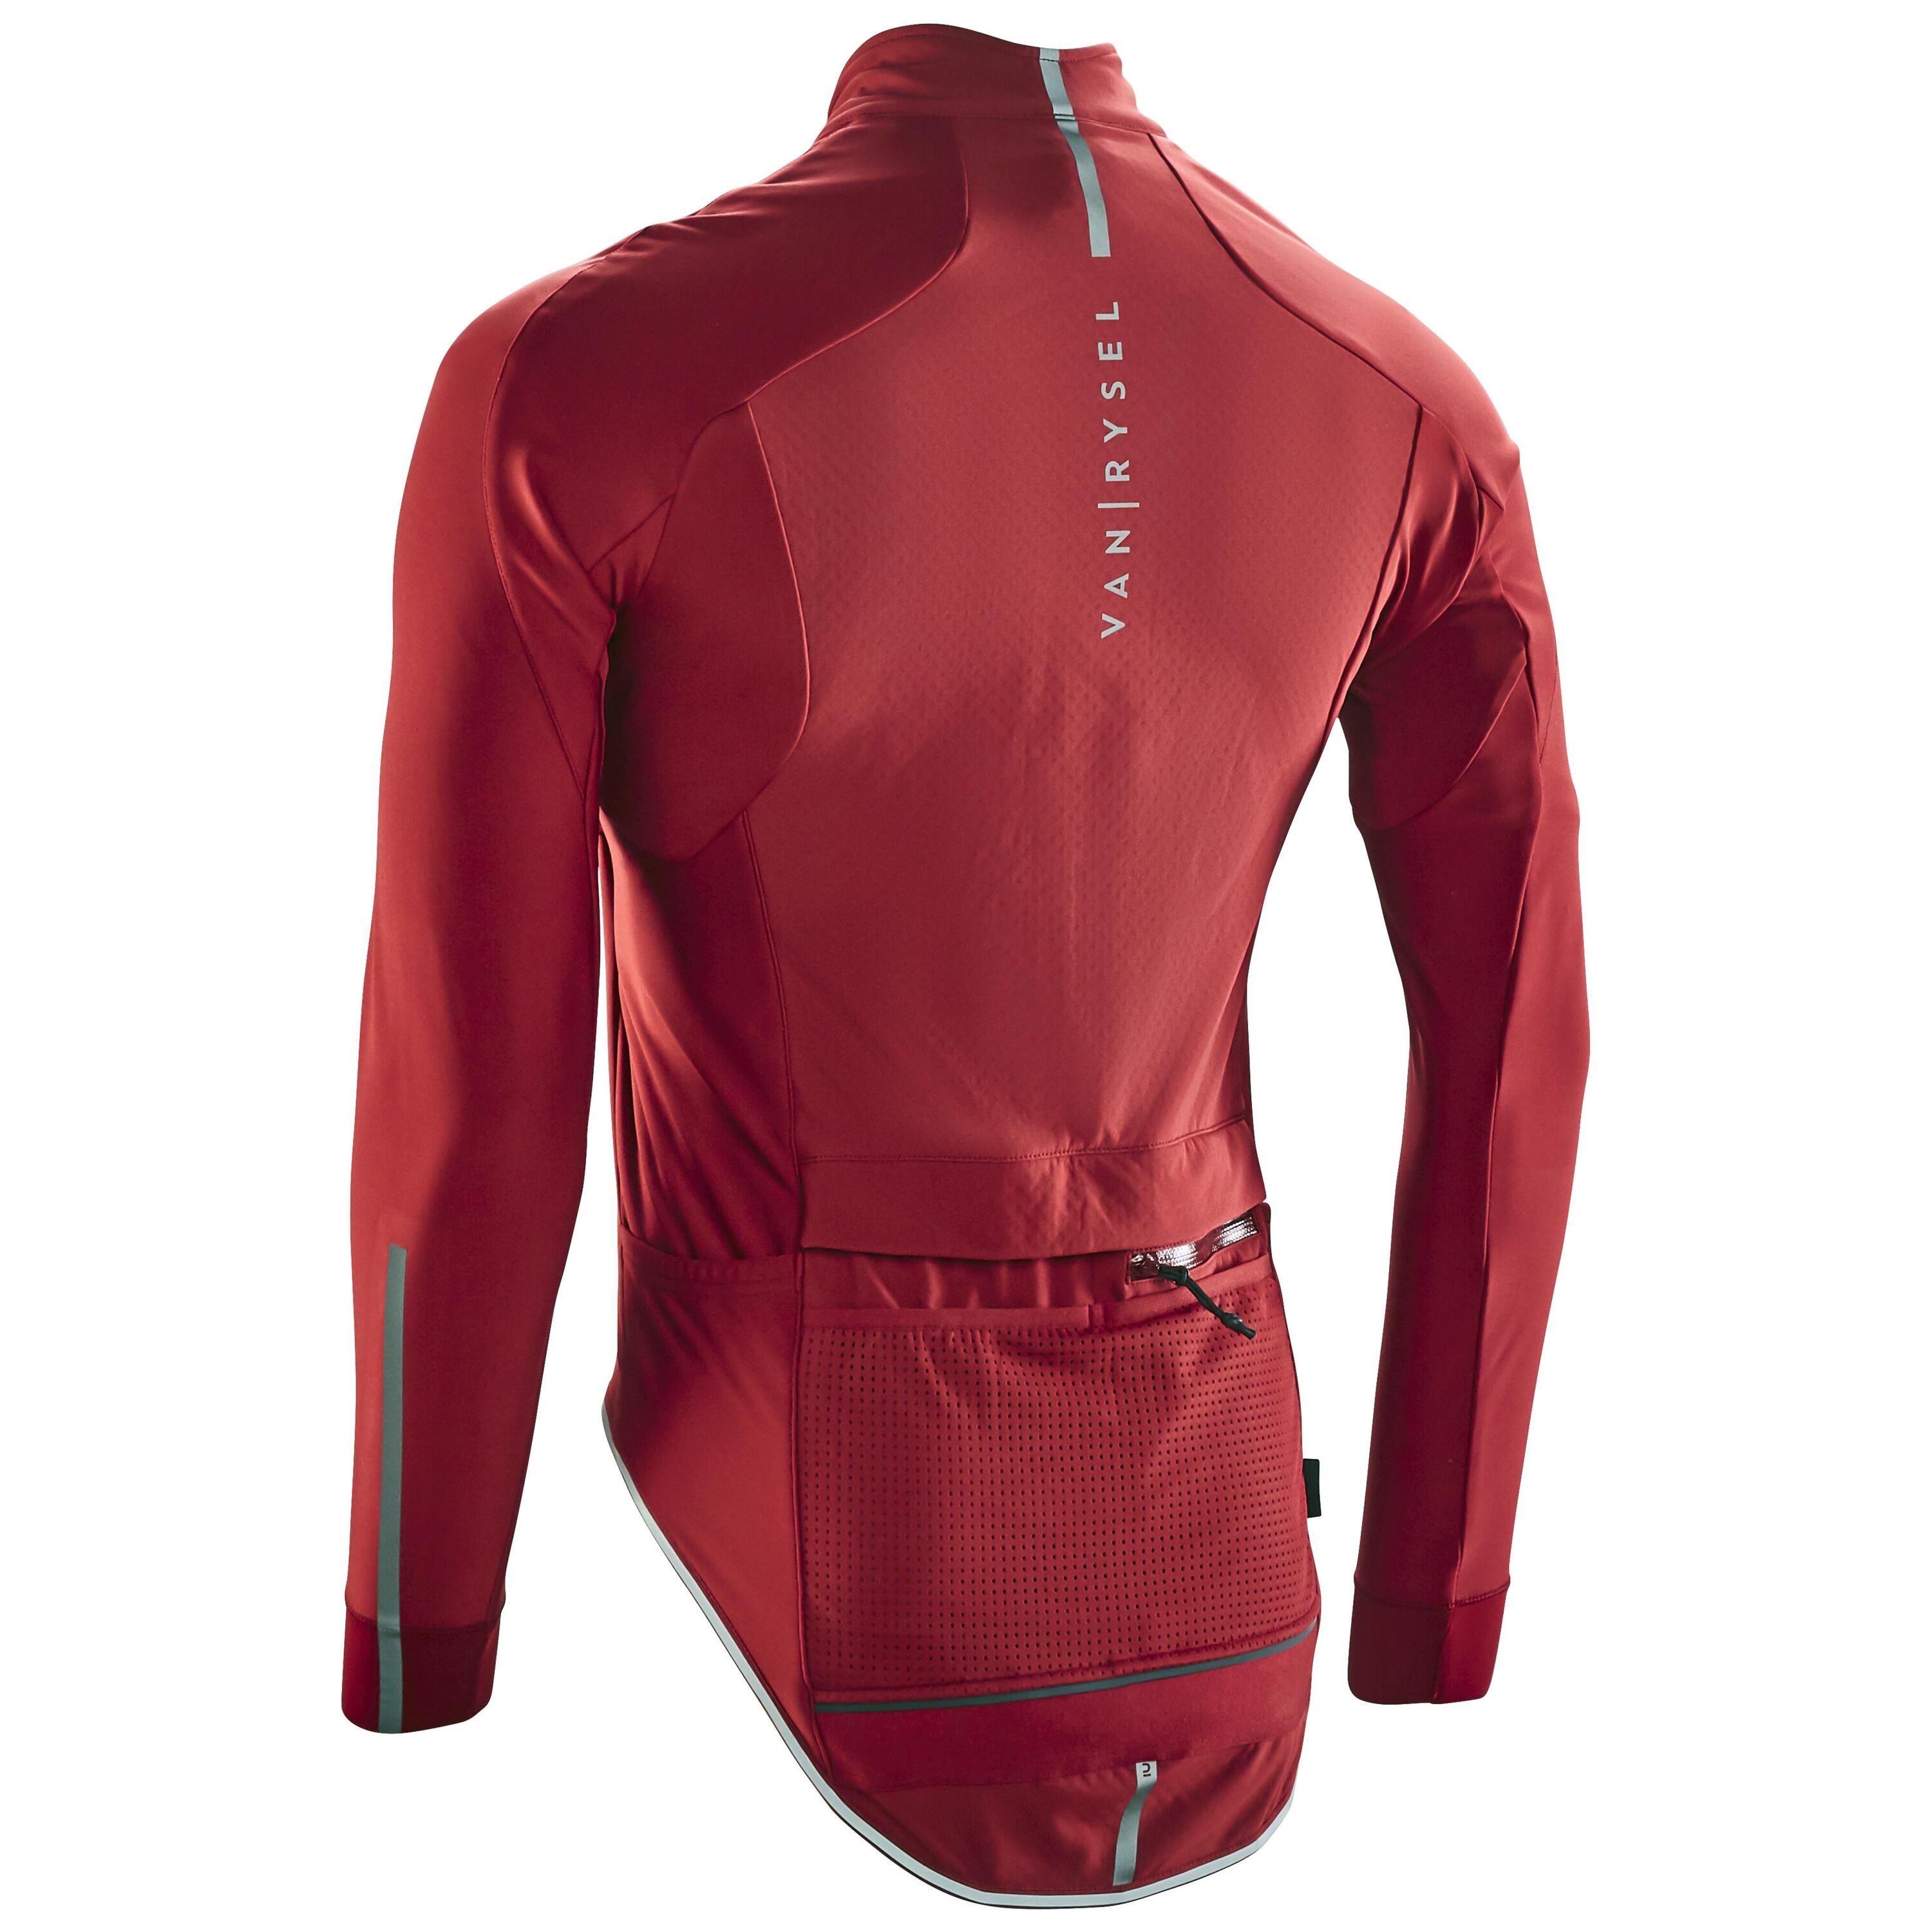 Men's Long-Sleeved Road Cycling Winter Jacket Racer Extreme - Burgundy 2/7